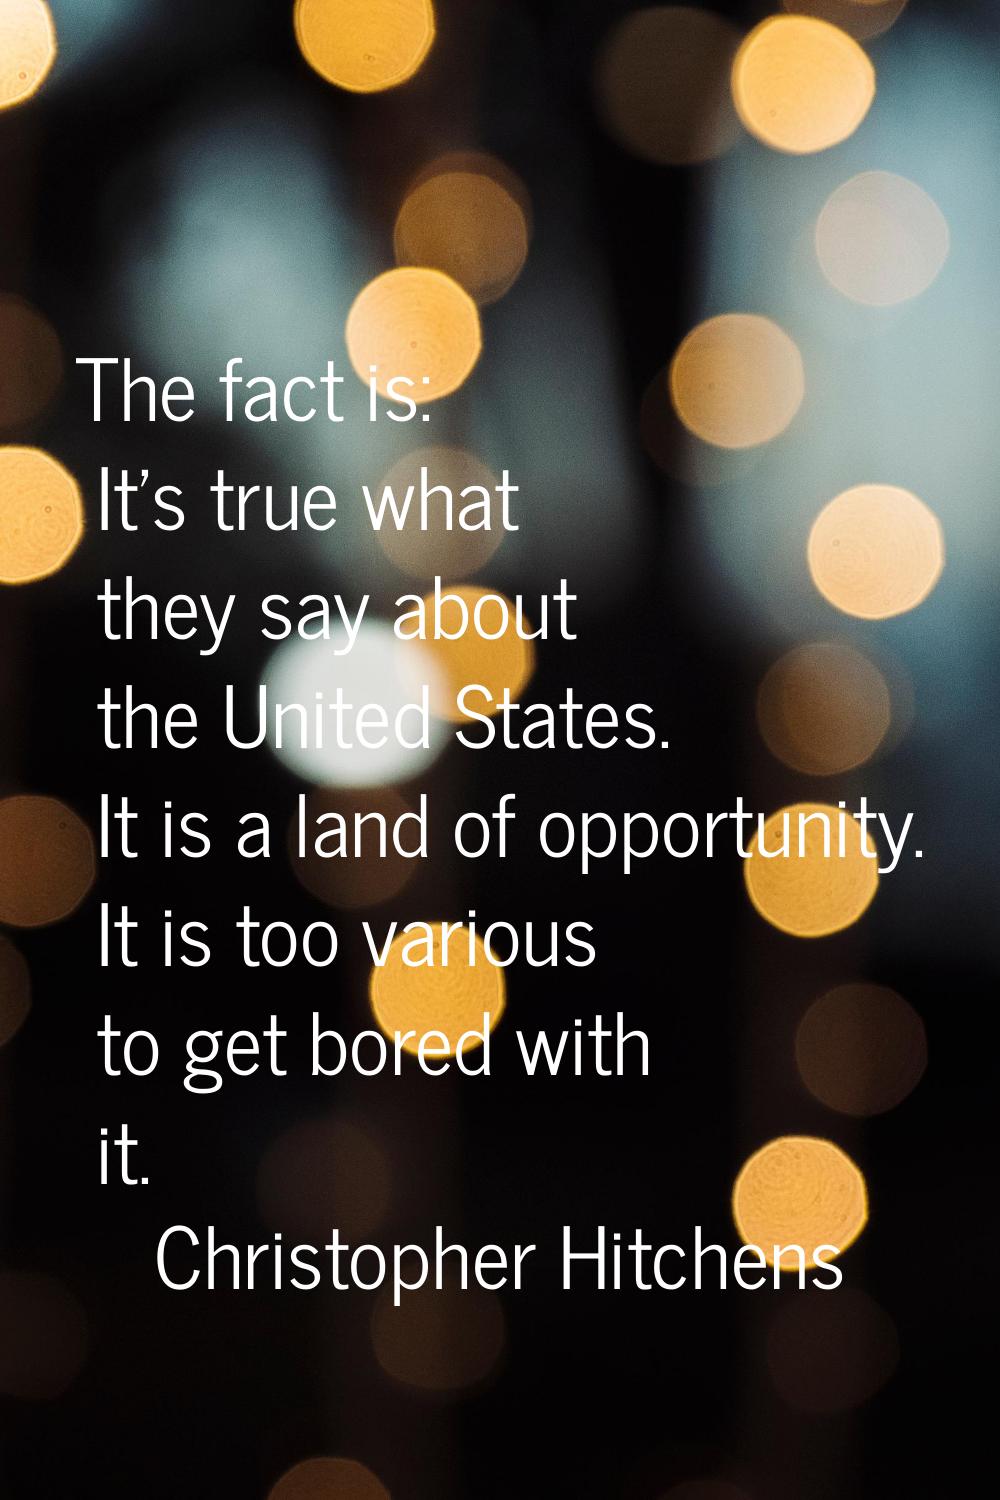 The fact is: It's true what they say about the United States. It is a land of opportunity. It is to